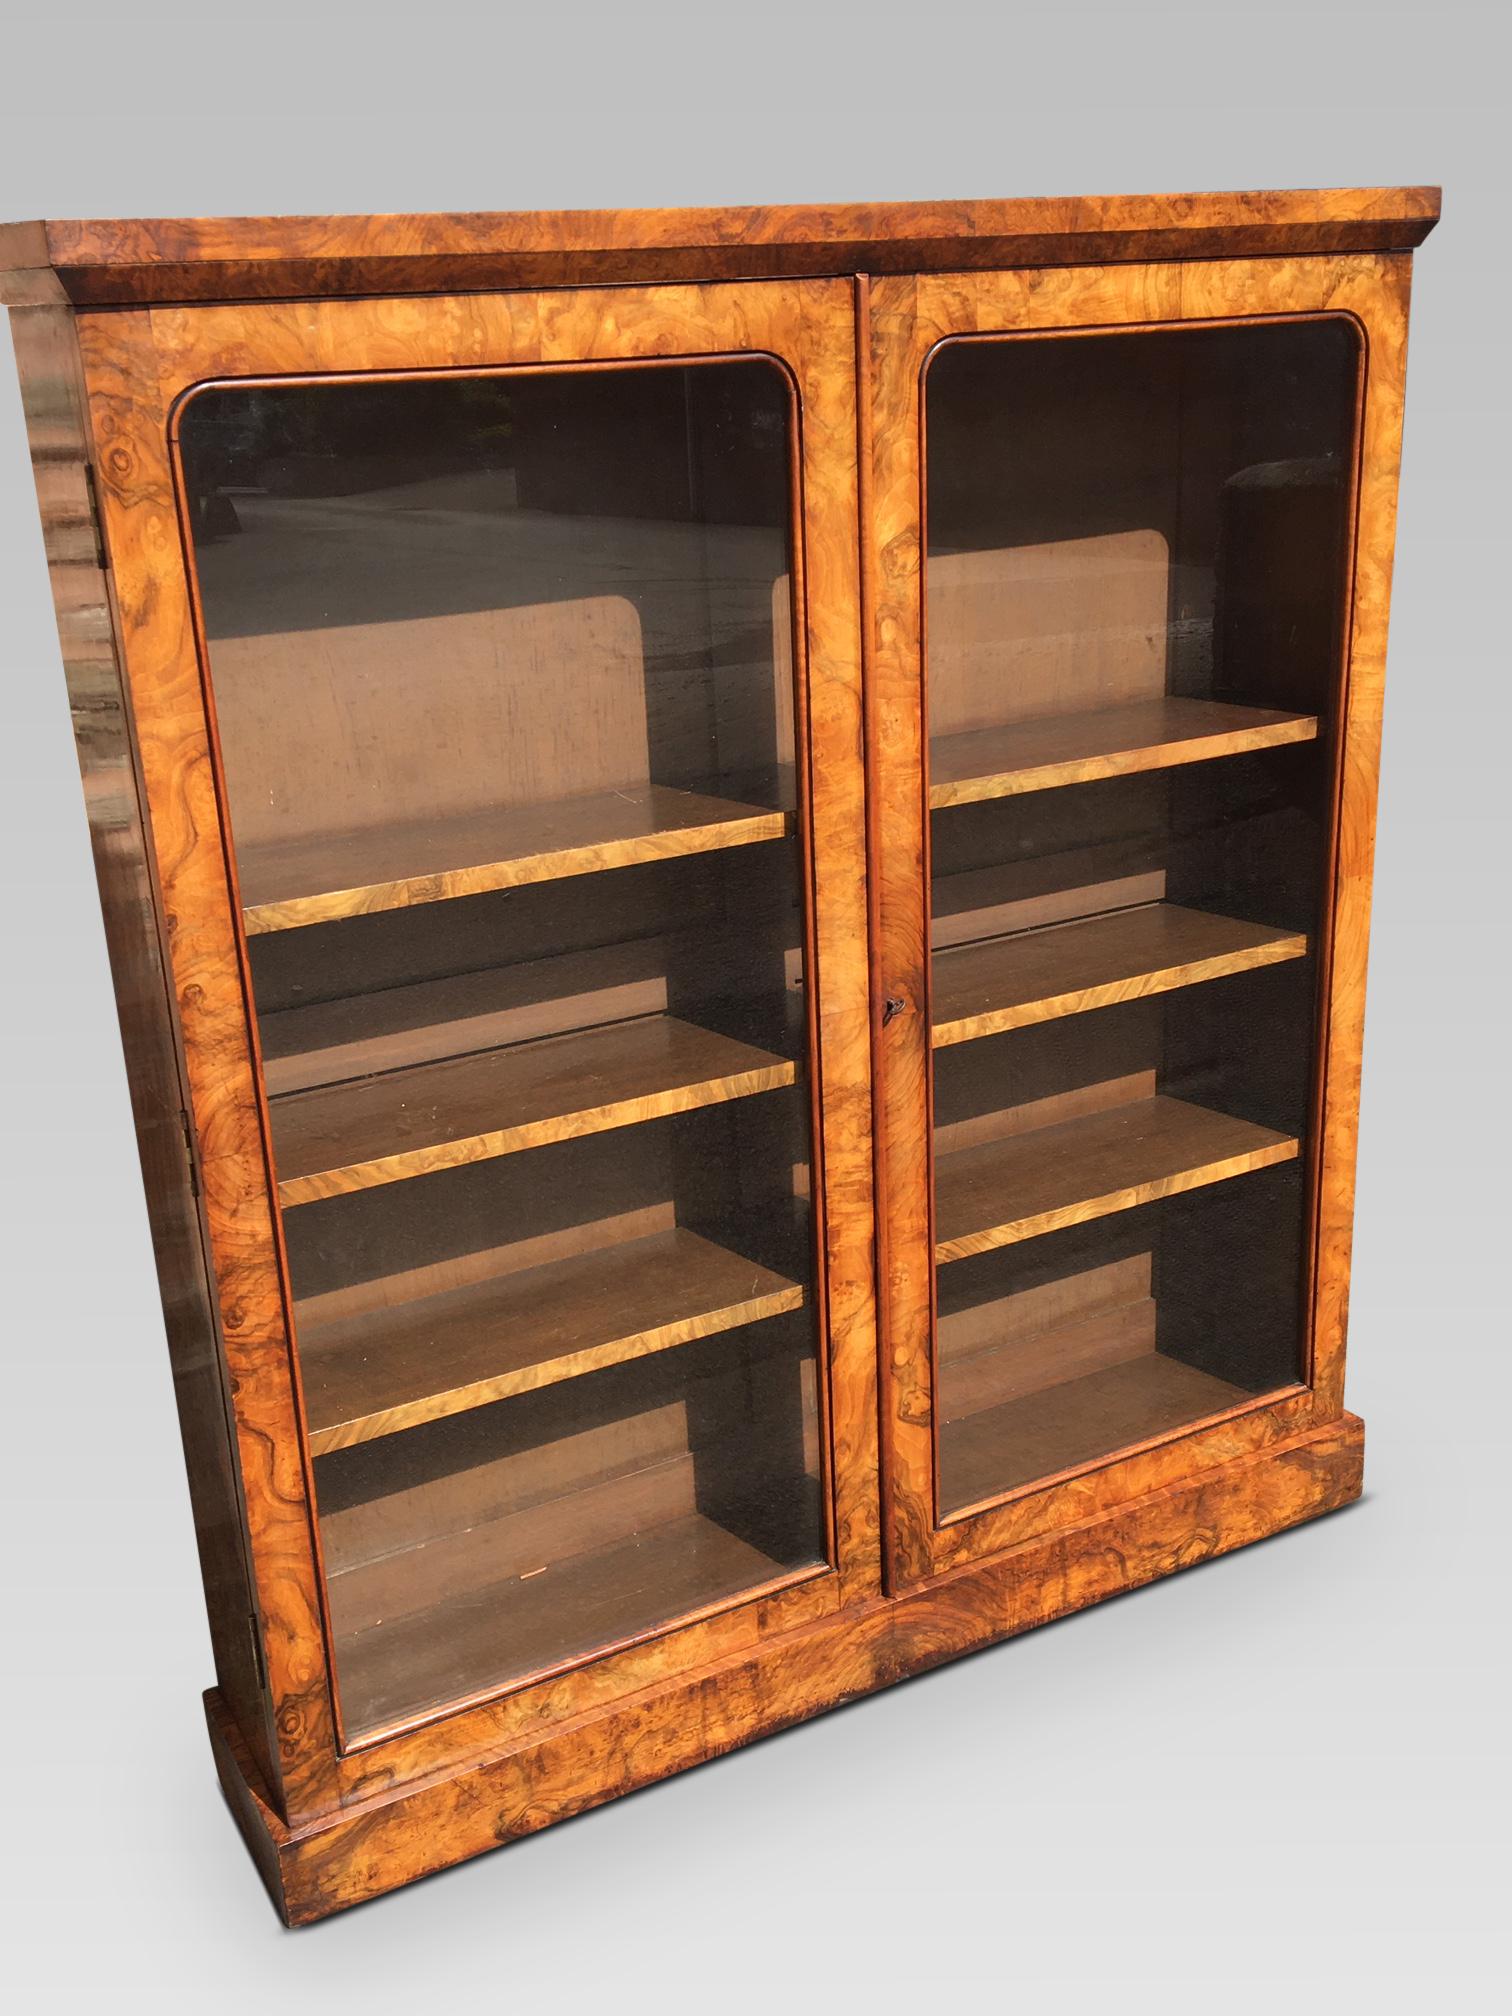 Fine quality English figured walnut library bookcase in excellent condition, circa 1850
This delightful bookcase has the most glorious vereers, original finish and mellow antique patination.
There are 3 adjustable shelves with walnut veneered